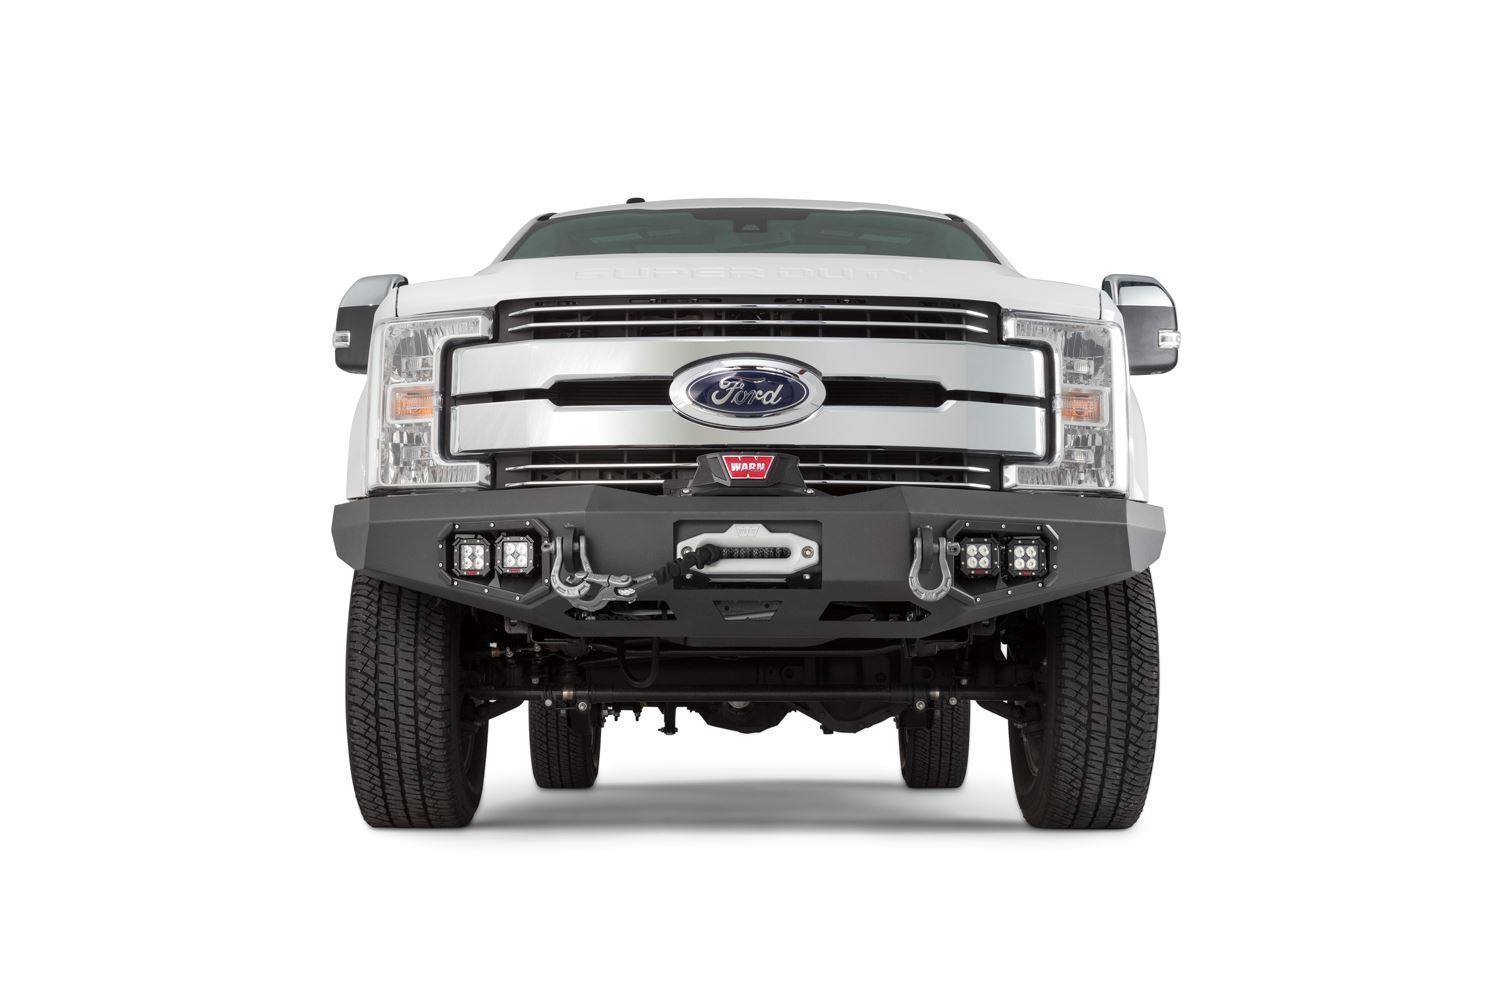 17-21 Ford F250/350 Ascent Front Bumper Warn Industries (front view)